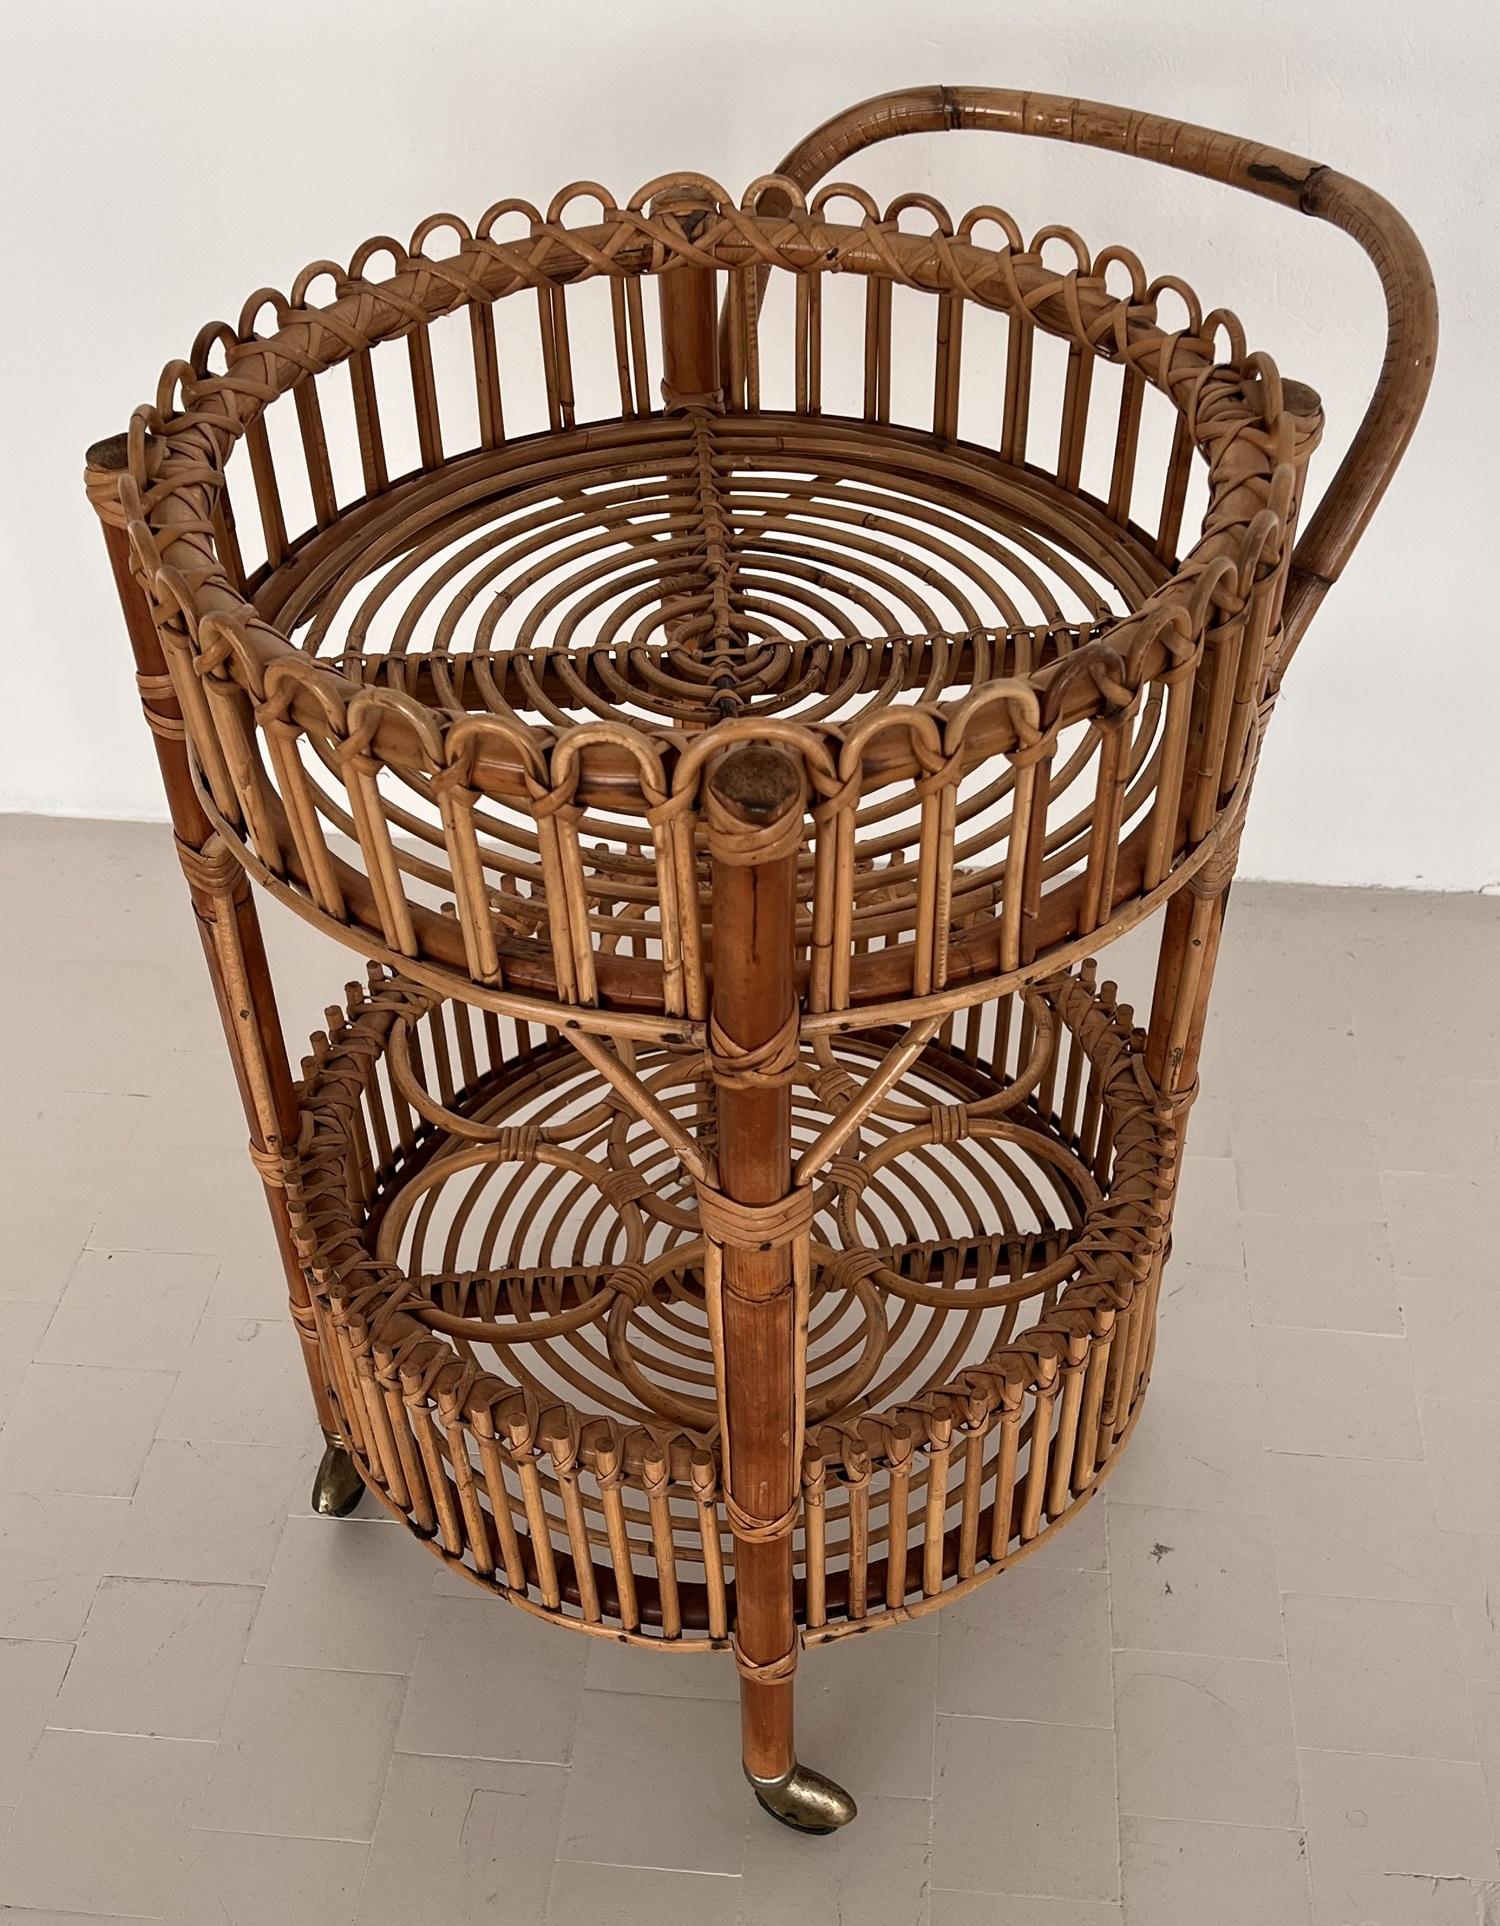 Hand-Crafted Italian Mid-Century Bamboo and Rattan Serving Bar Cart or Trolley, 1970 For Sale